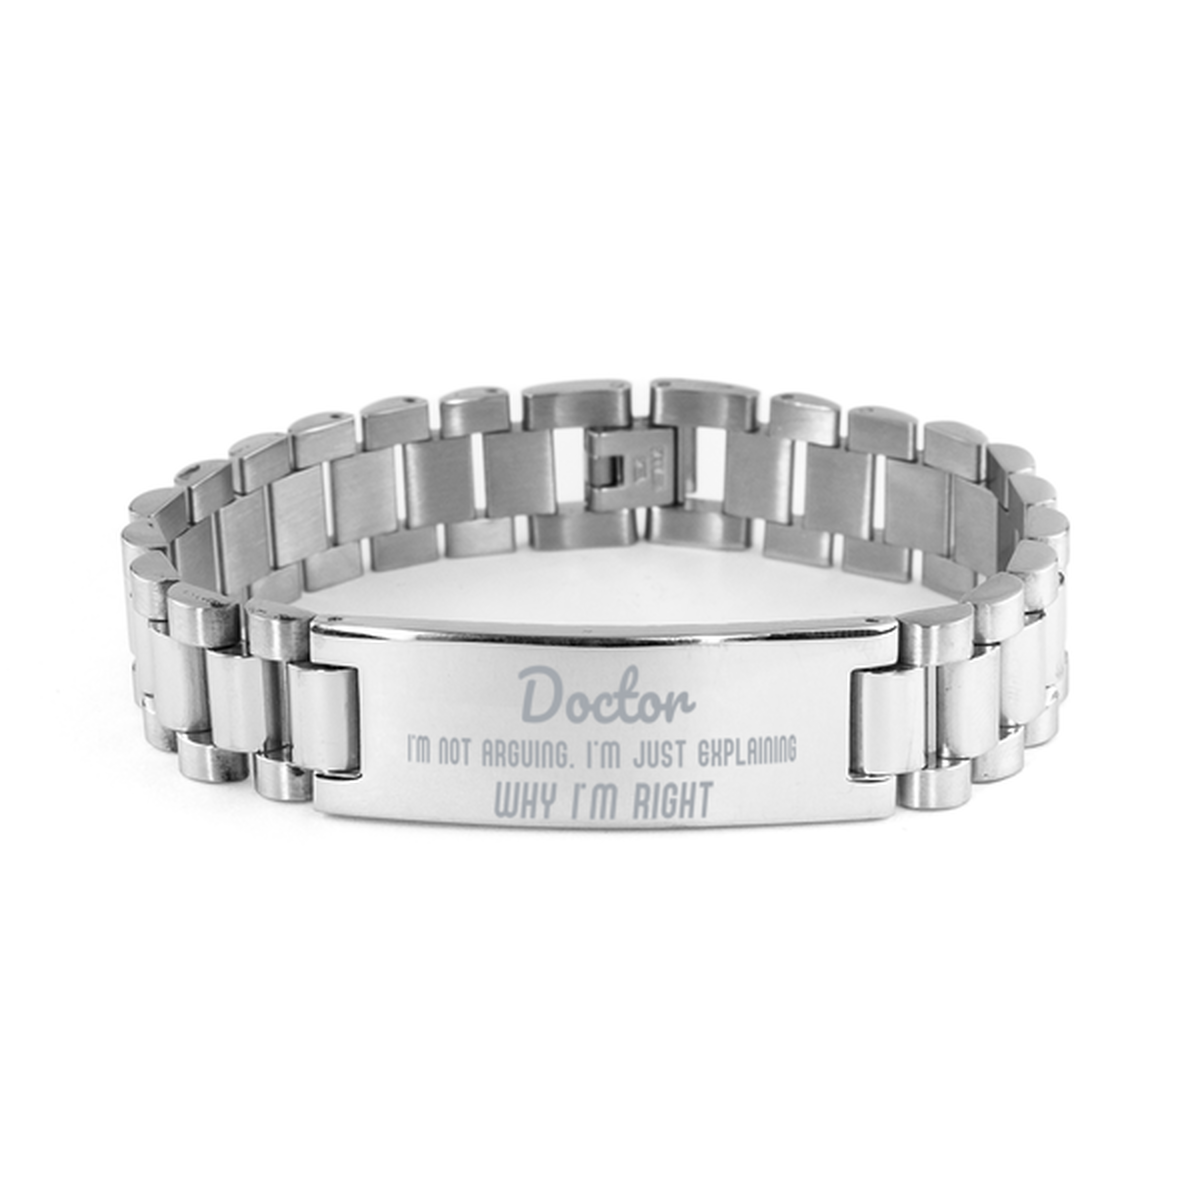 Doctor I'm not Arguing. I'm Just Explaining Why I'm RIGHT Ladder Stainless Steel Bracelet, Graduation Birthday Christmas Doctor Gifts For Doctor Funny Saying Quote Present for Men Women Coworker